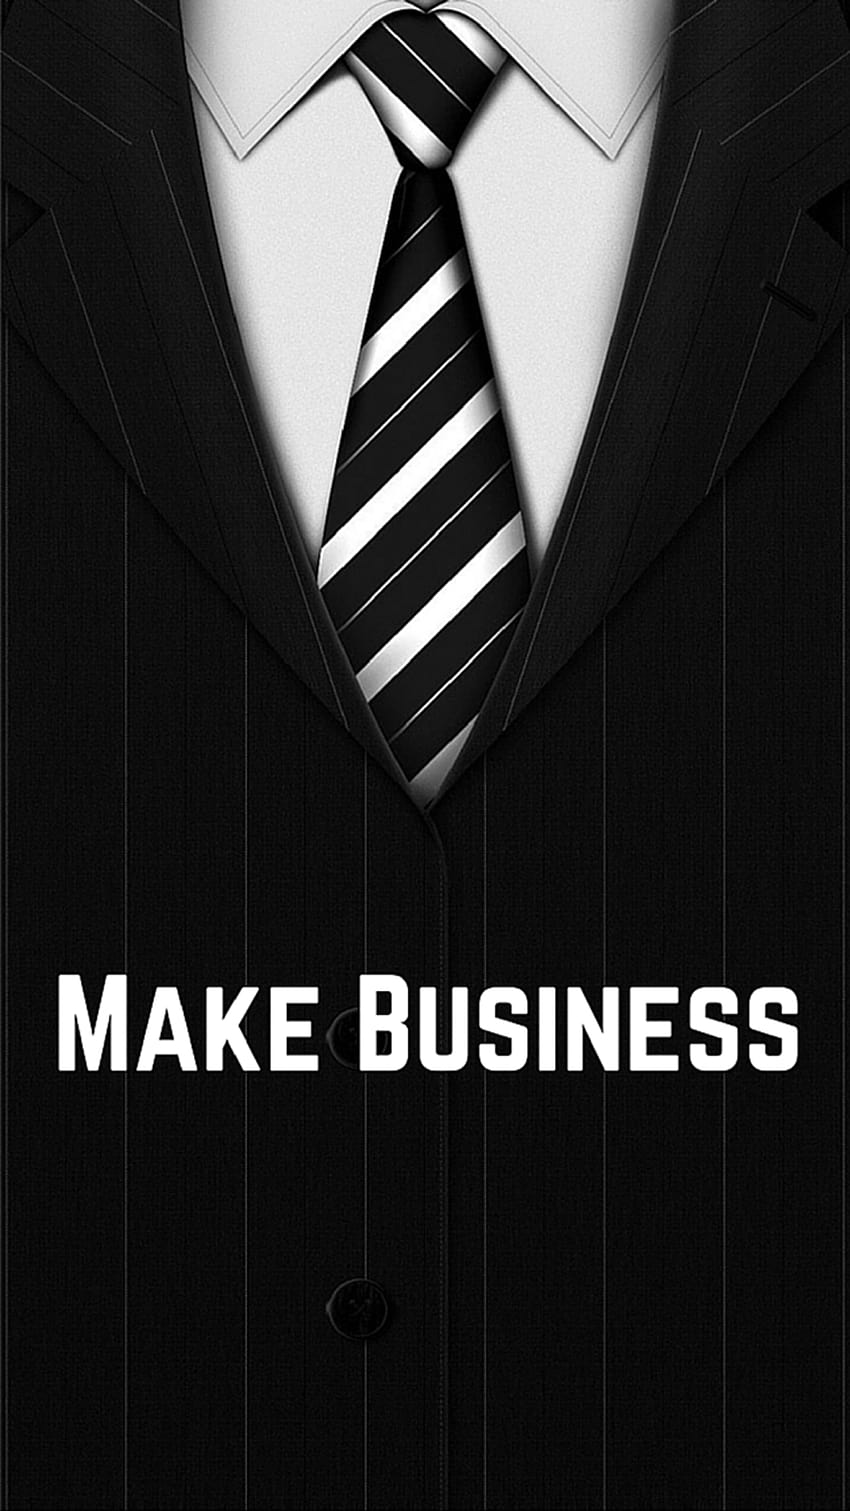 ↑↑TAP AND GET THE APP! Art Creative Quote Business Tie Suit Shirt Black White iPhone 6 Plus, men business HD phone wallpaper